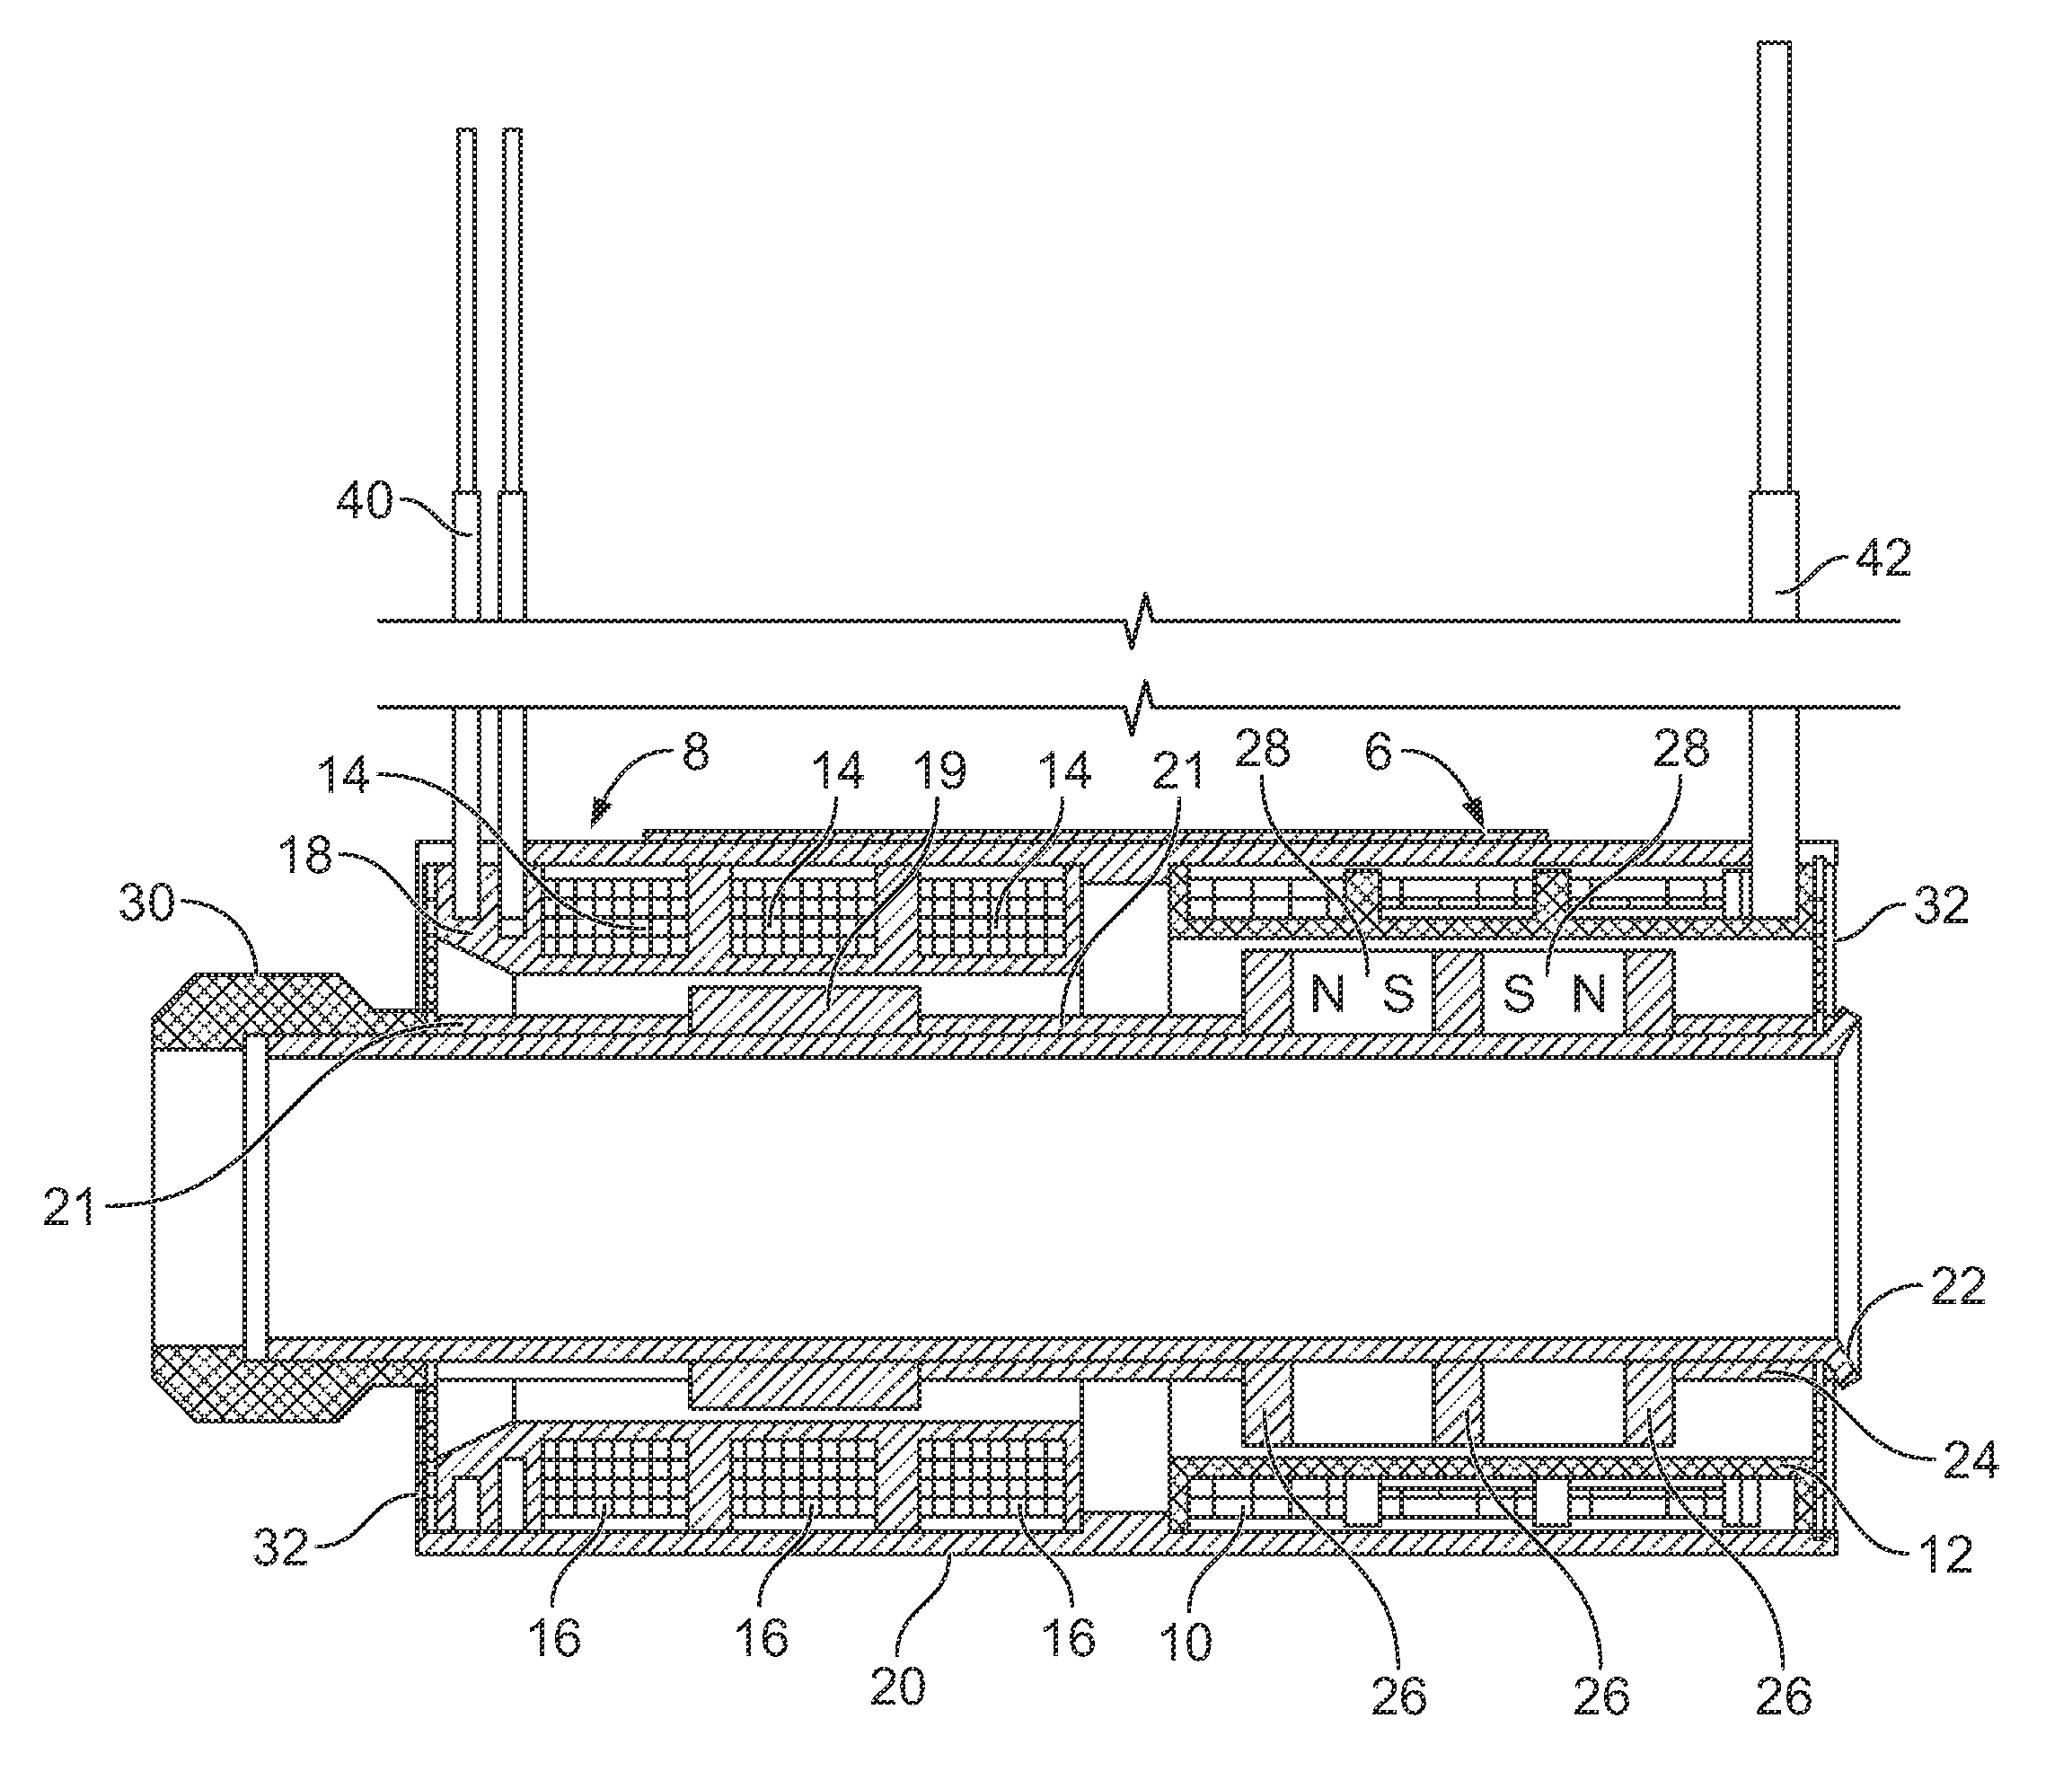 Voice coil actuator with integrated LVDT